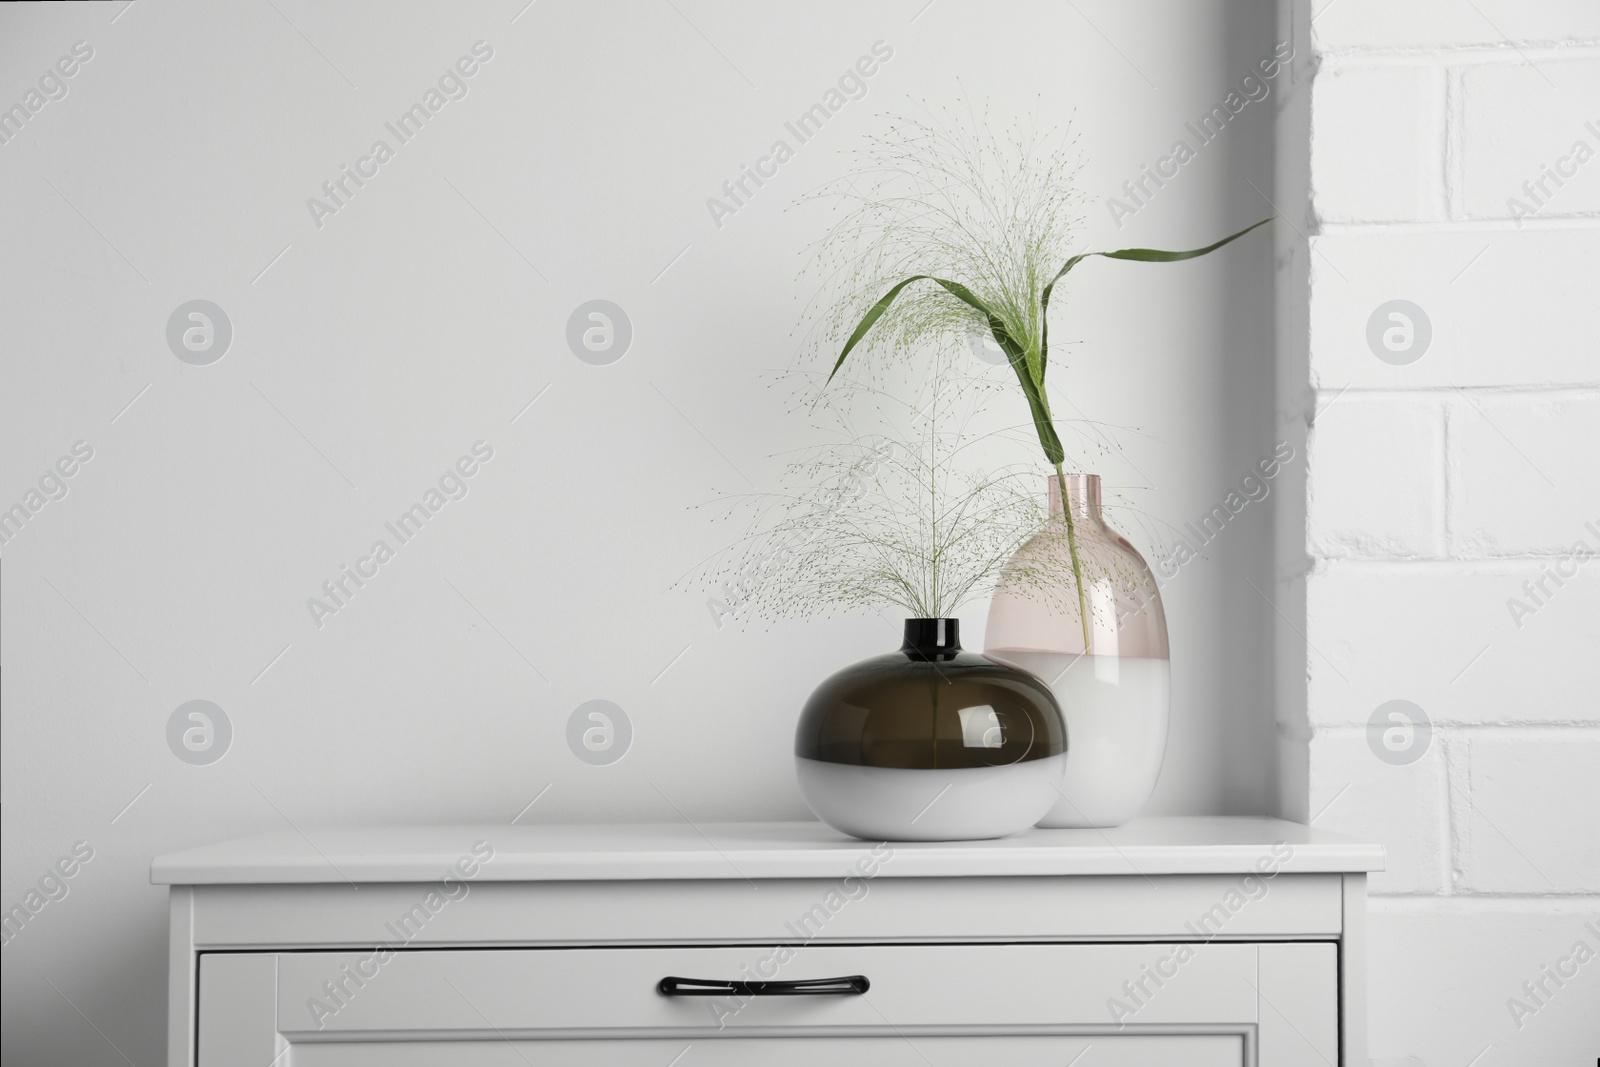 Photo of Decorative vases with plants on commode indoors